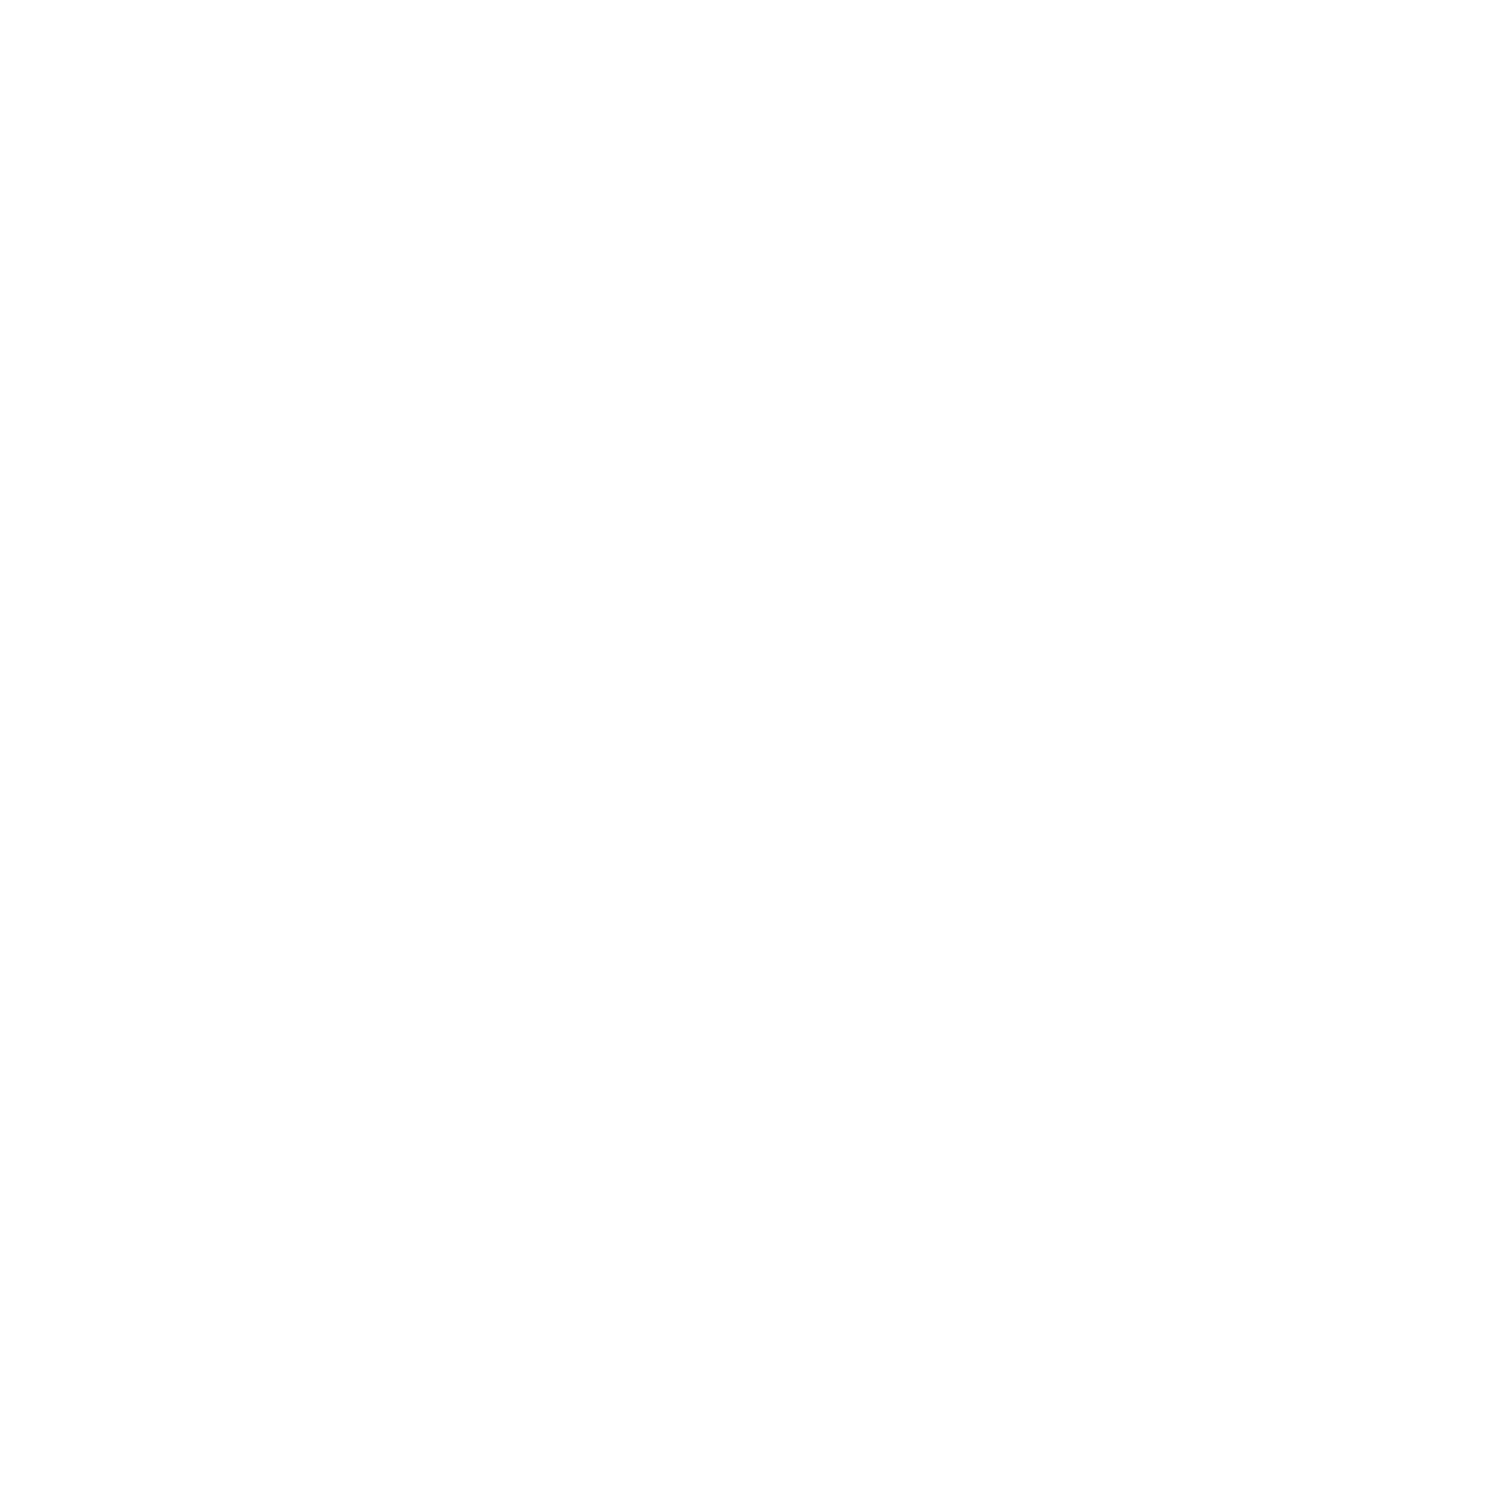 Pathway2Career Consulting